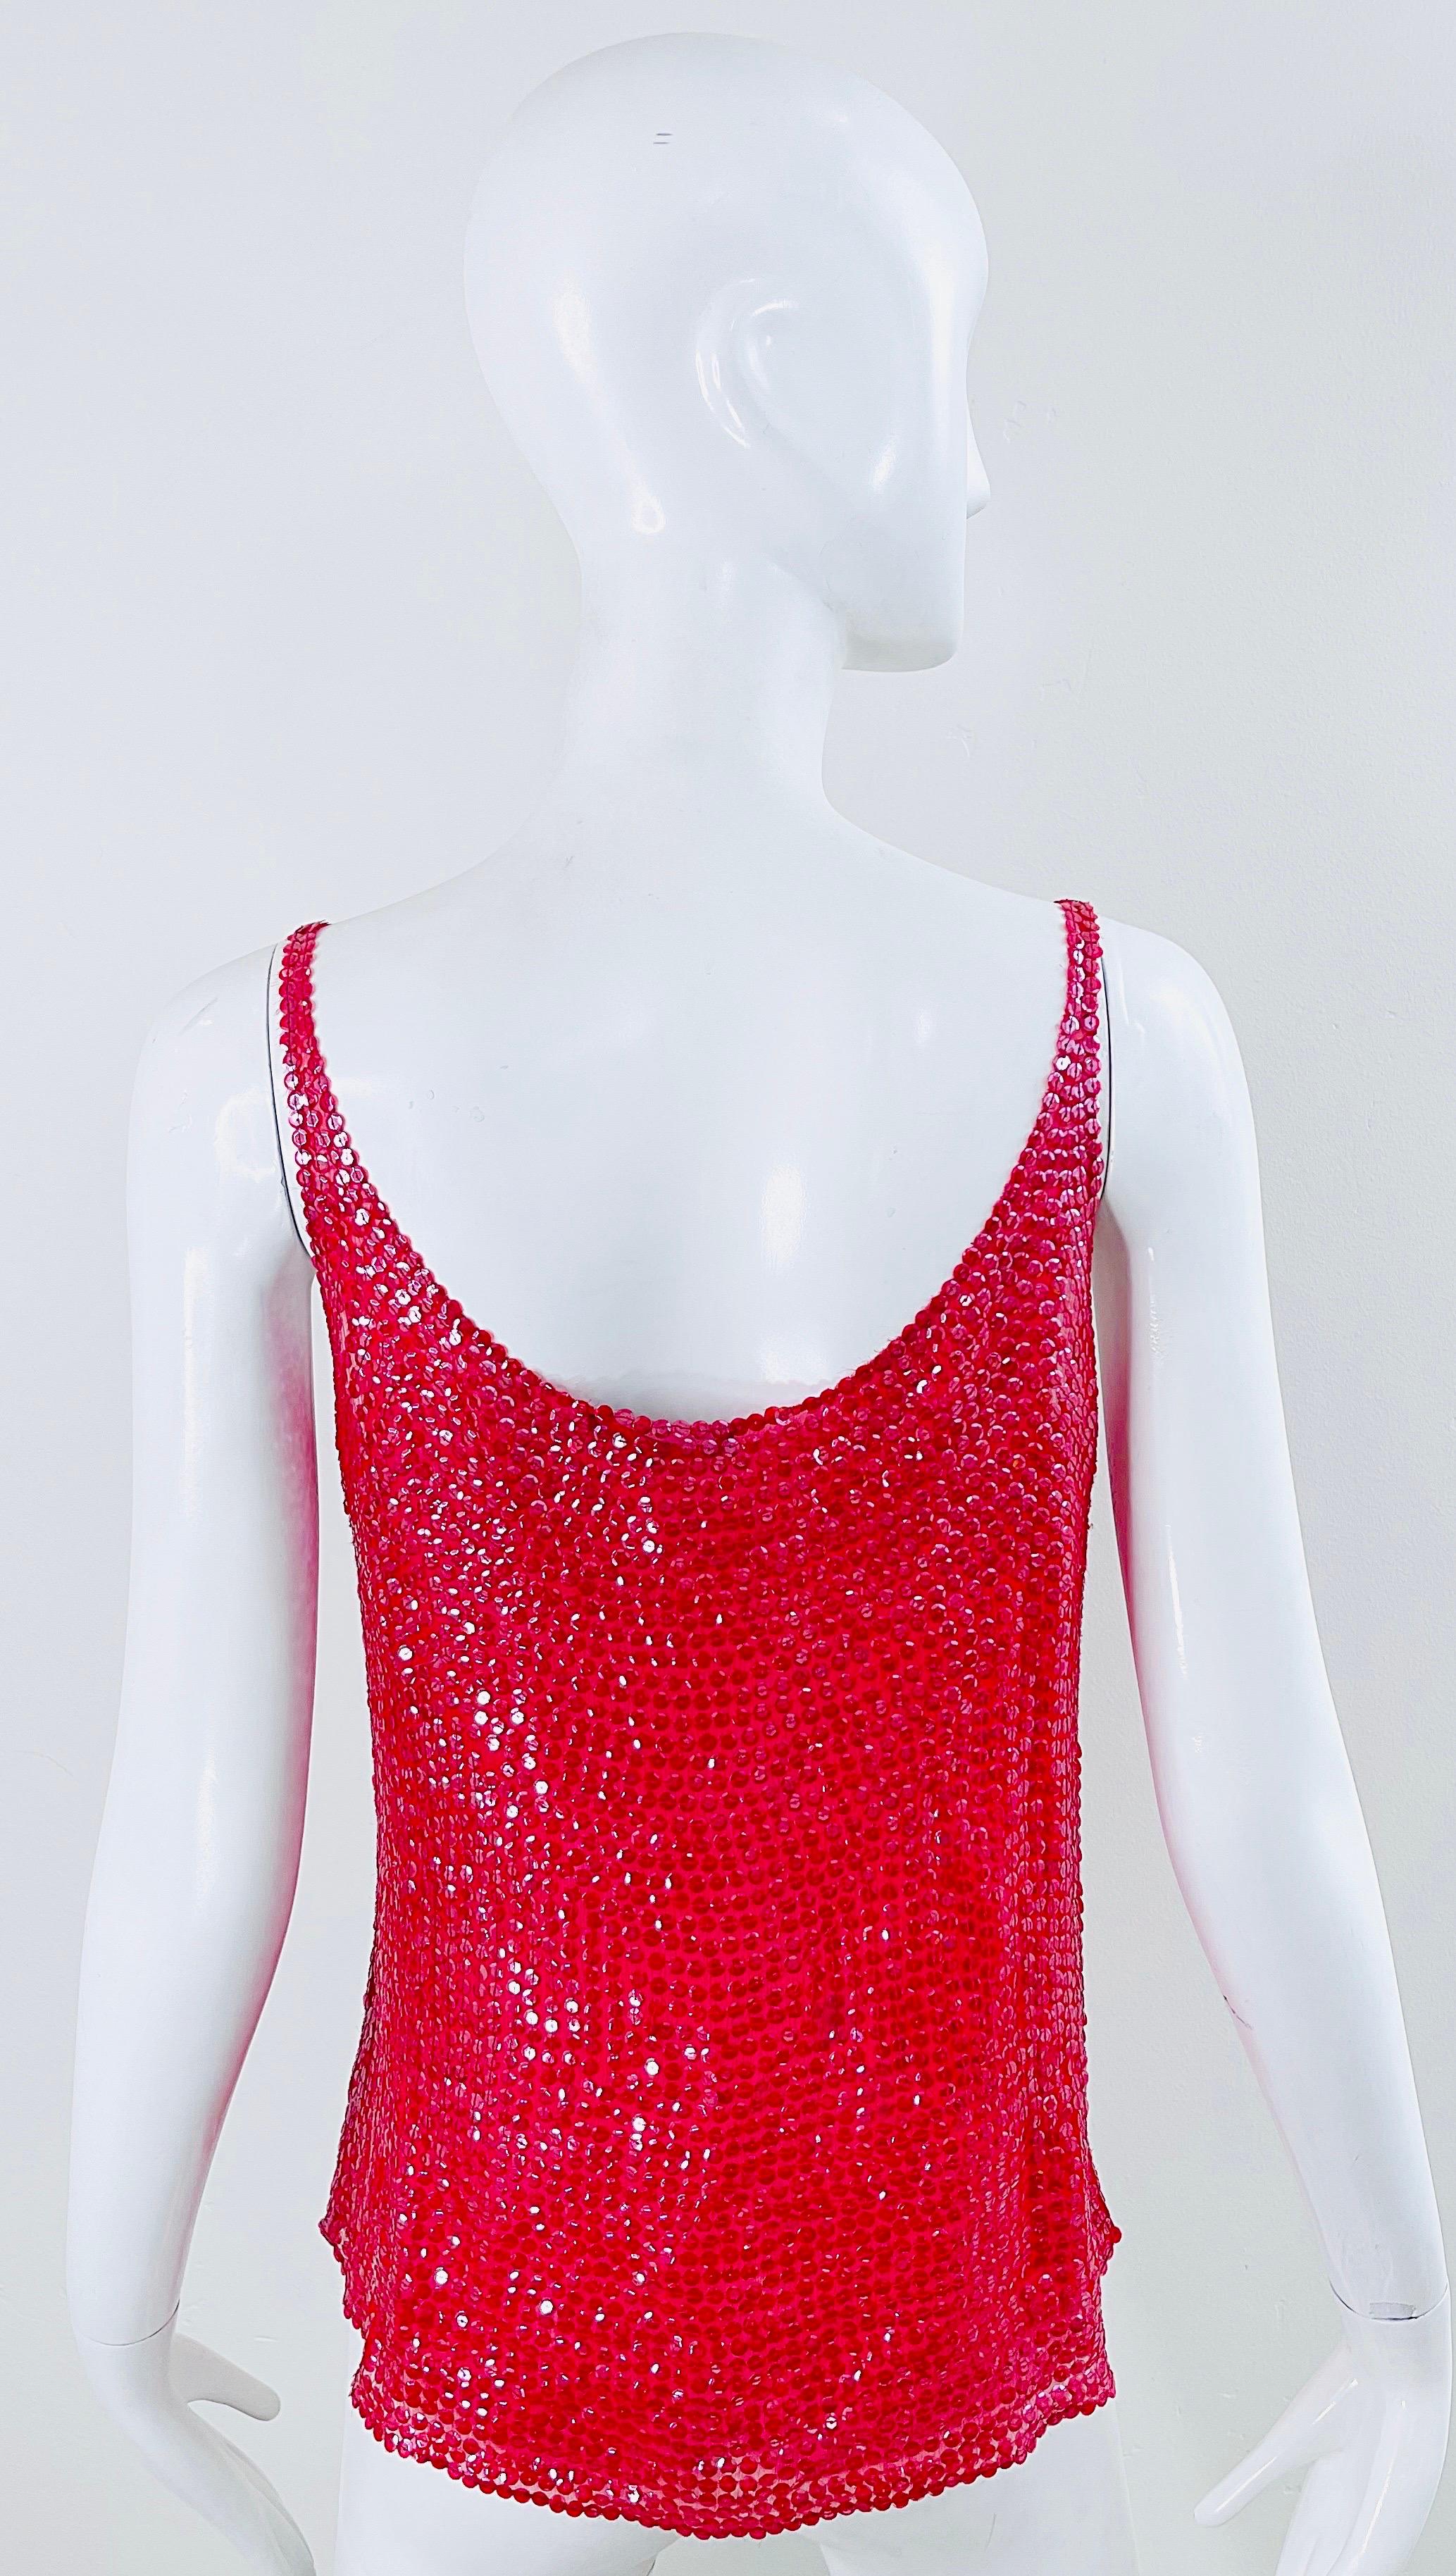 Halston 1970s Lipstick Red Silk Chiffon Fully Sequin Vintage 70s Sleeveless Top For Sale 10